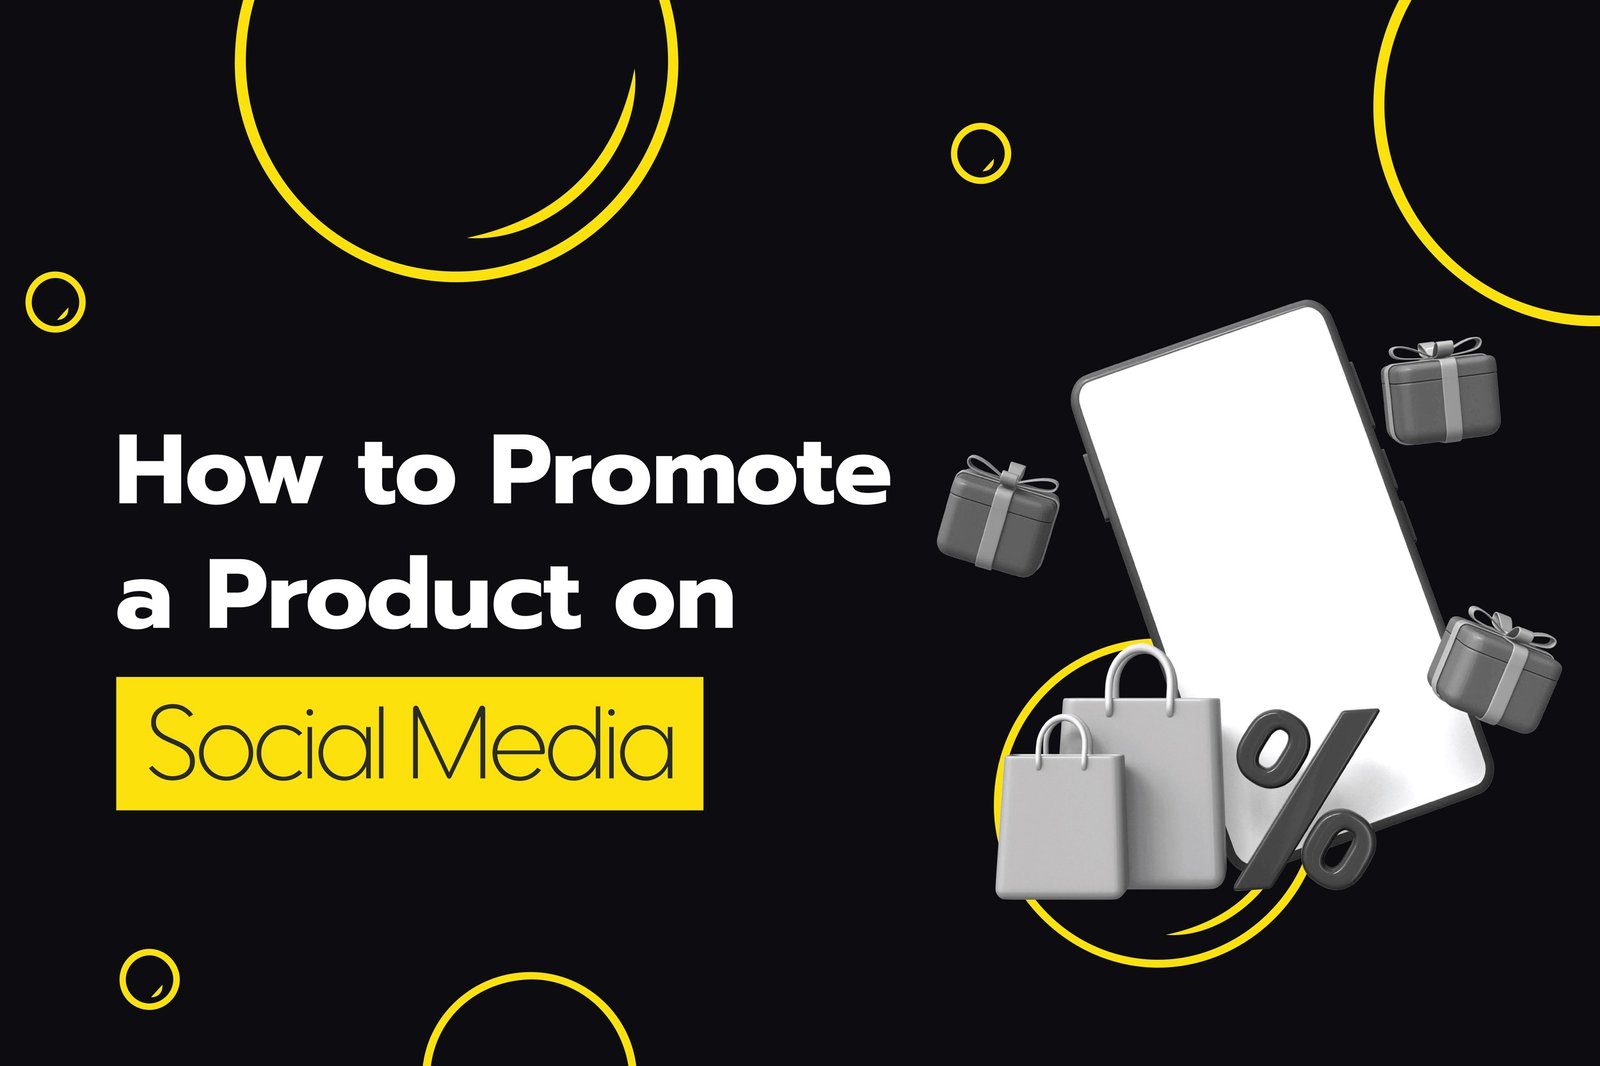 How to Promote a Product on Social Media